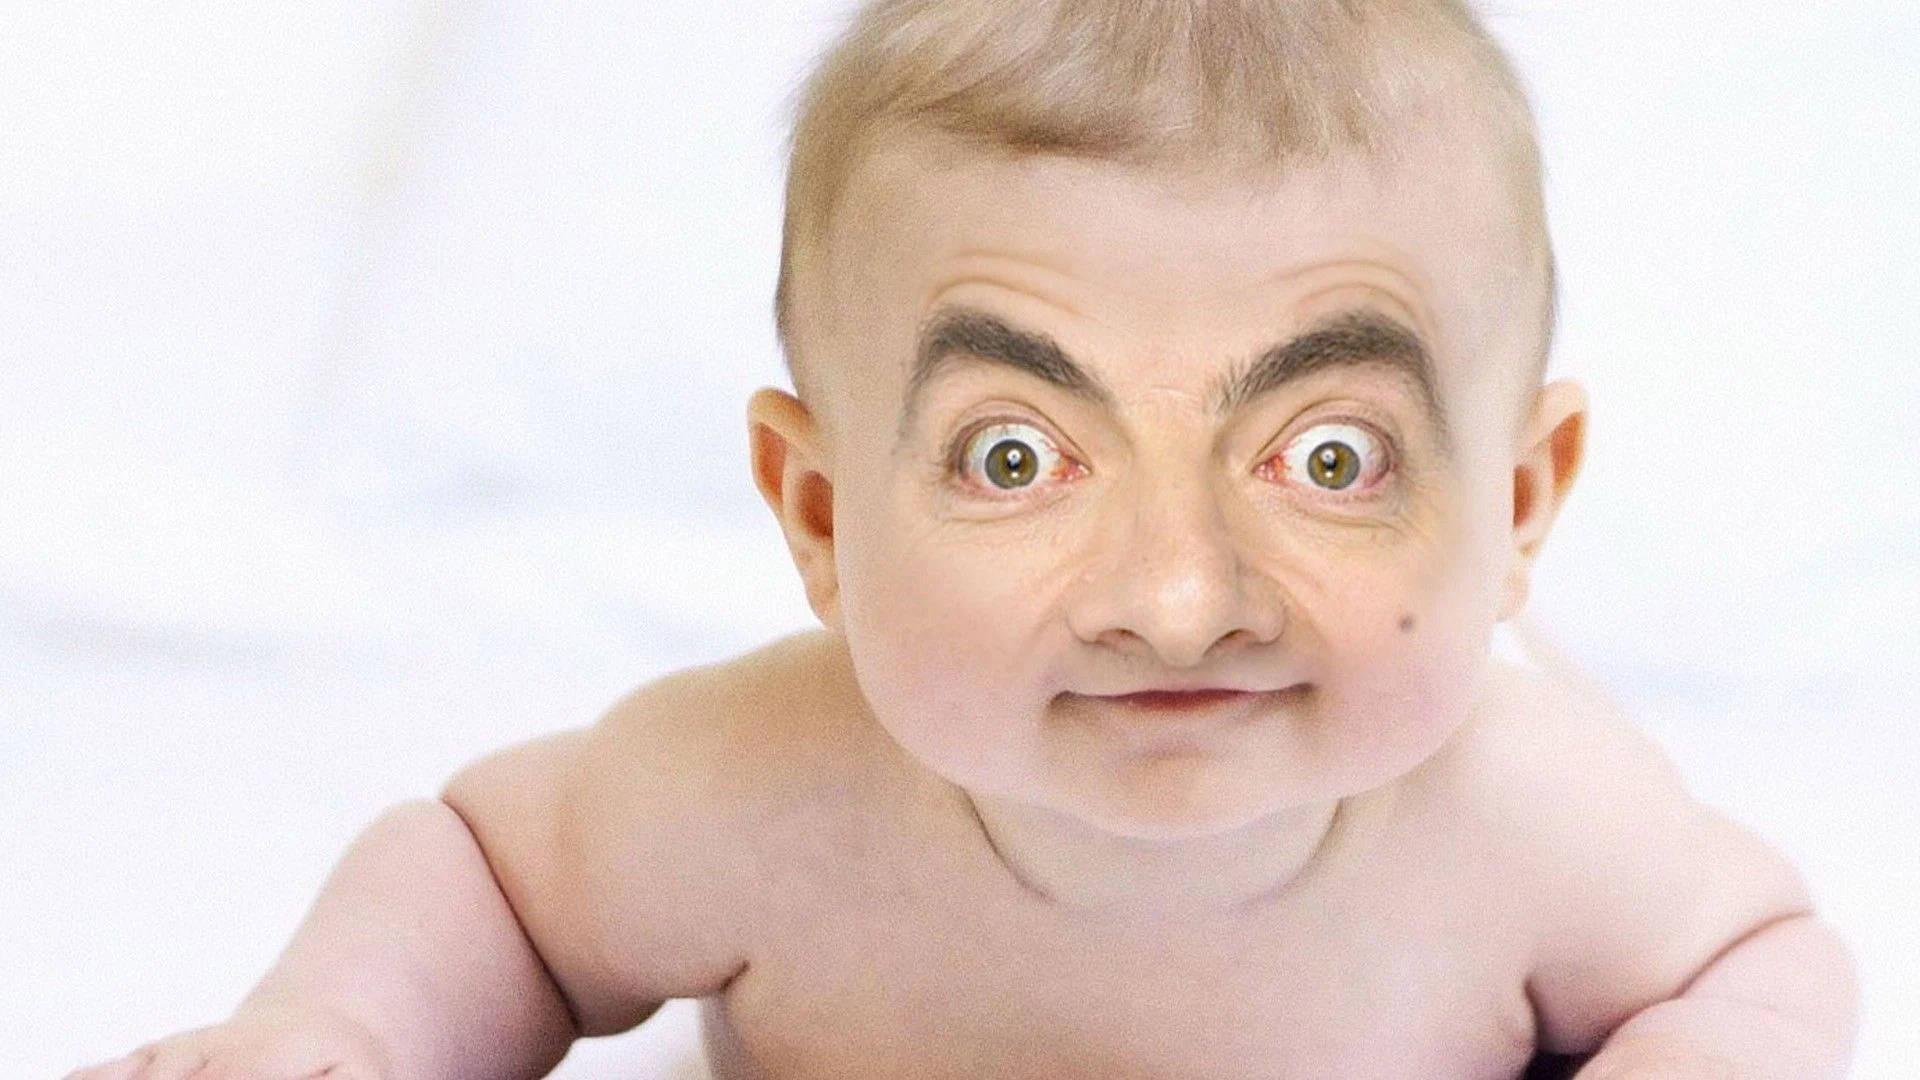 Download Funny Baby With Mr. Bean Face Wallpaper 